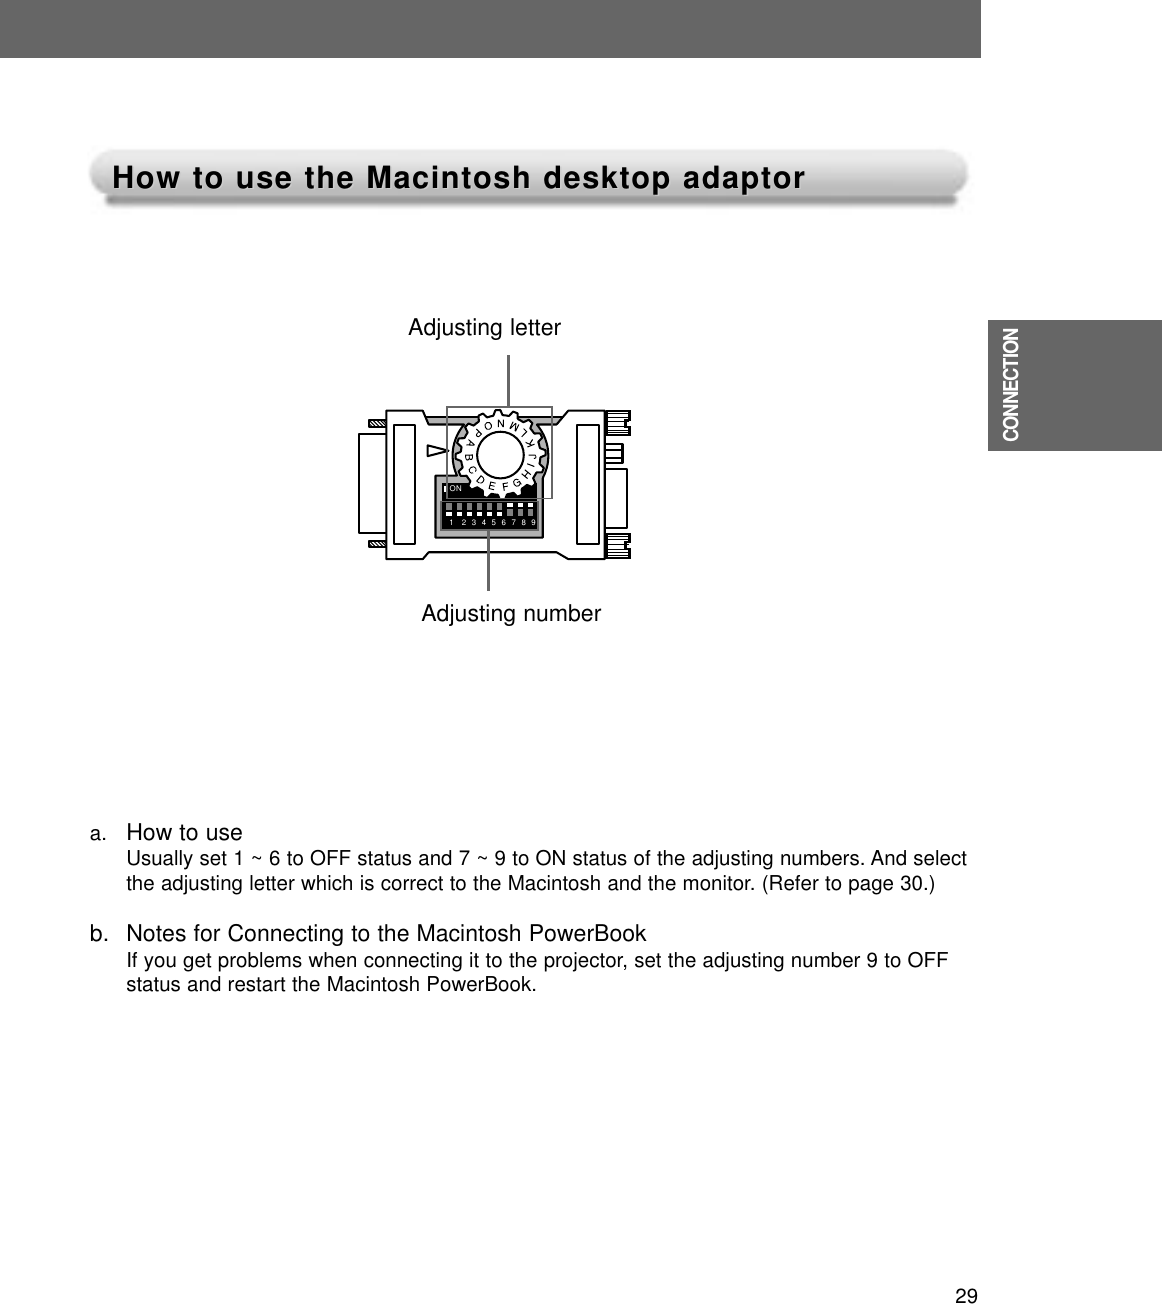 29CONNECTIONHow to use the Macintosh desktop adaptor How to use the Macintosh desktop adaptor 1 2 3 4 5 6 7 8 9ONAdjusting letterAdjusting numbera. How to useUsually set 1 ~ 6 to OFF status and 7 ~ 9 to ON status of the adjusting numbers. And selectthe adjusting letter which is correct to the Macintosh and the monitor. (Refer to page 30.) b. Notes for Connecting to the Macintosh PowerBookIf you get problems when connecting it to the projector, set the adjusting number 9 to OFFstatus and restart the Macintosh PowerBook.